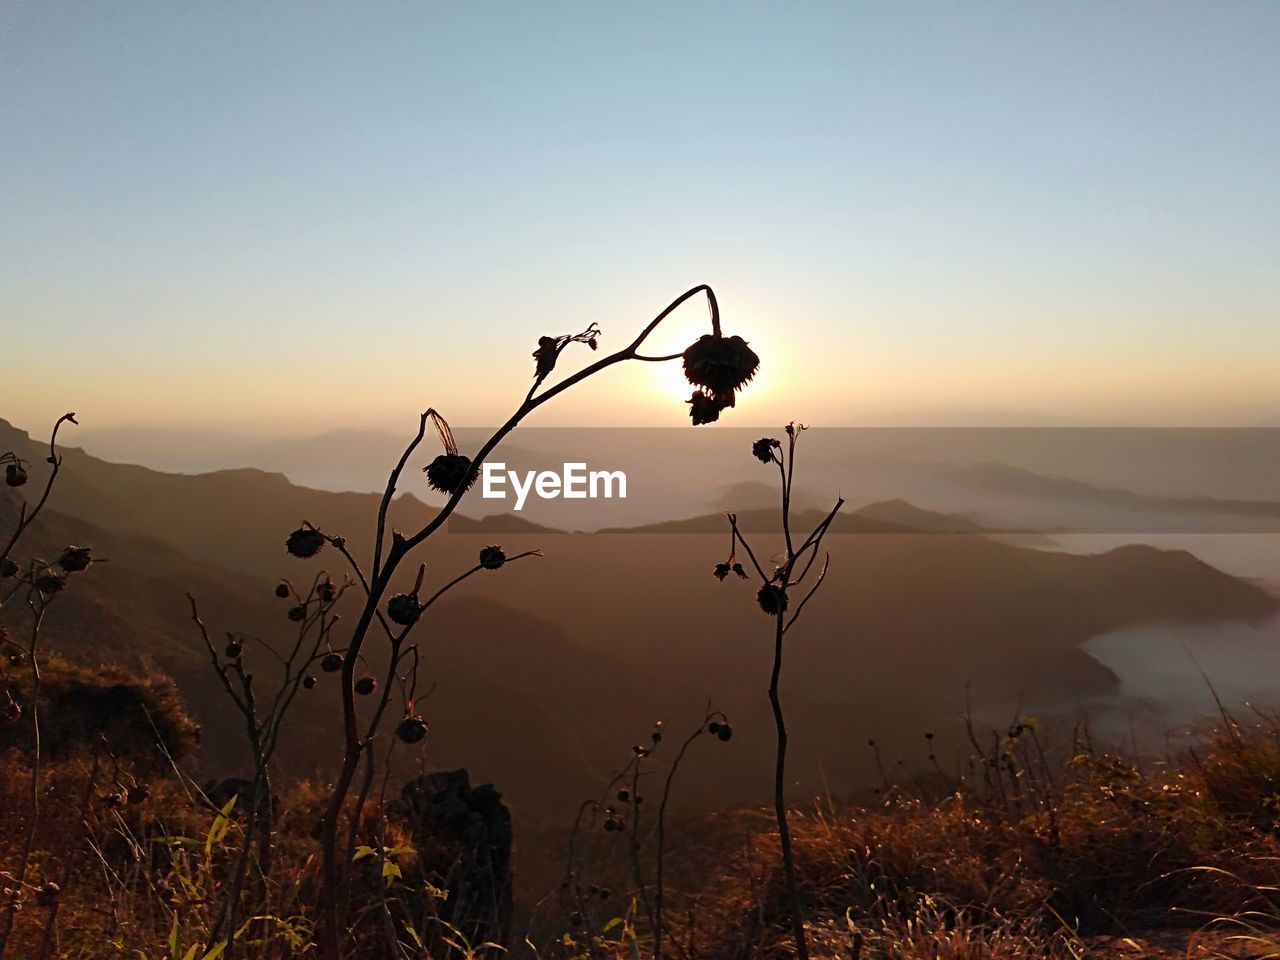 Silhouette plants against mountains during sunset